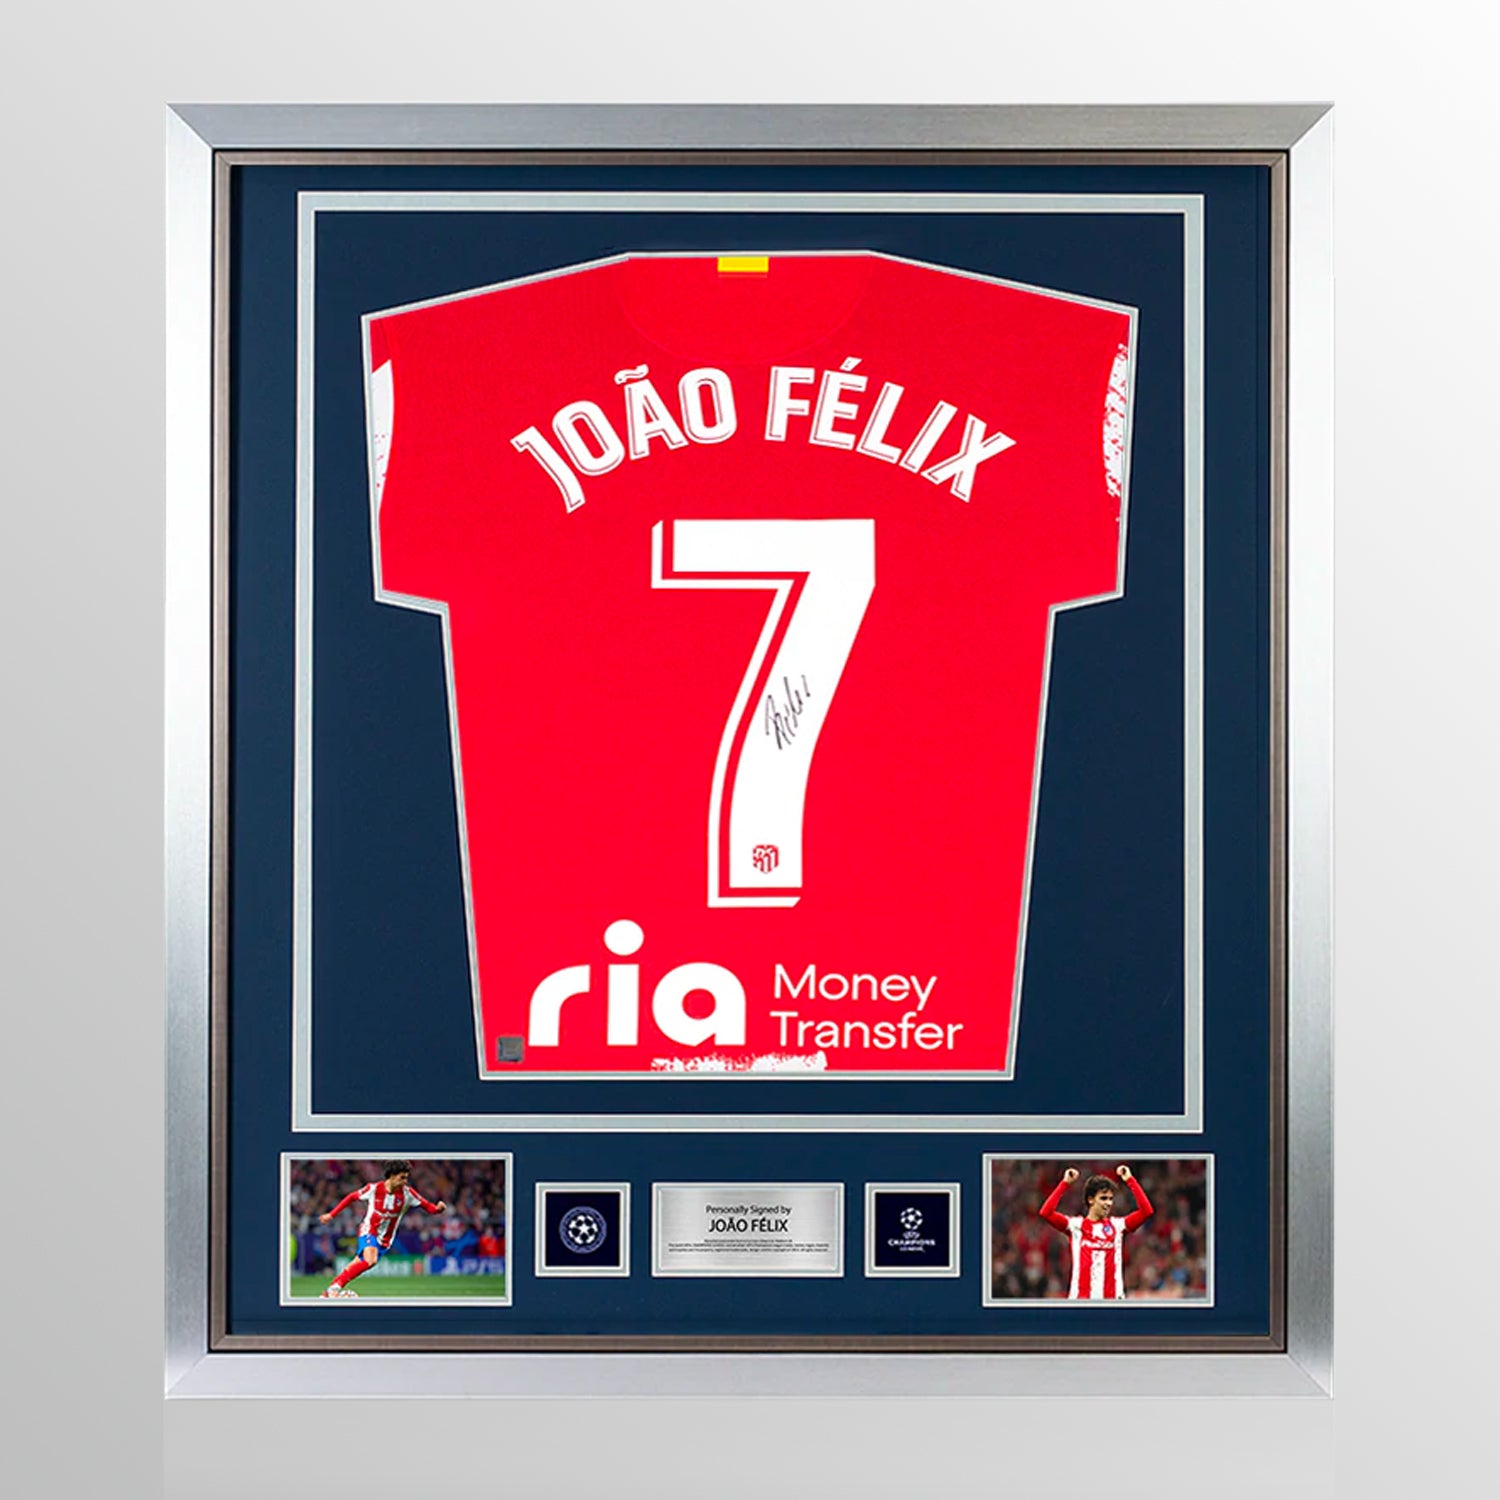 Joao Felix Official UEFA Champions League Back Signed and Framed Atletico Madrid 2021-22 Home Shirt UEFA Club Competitions Online Store